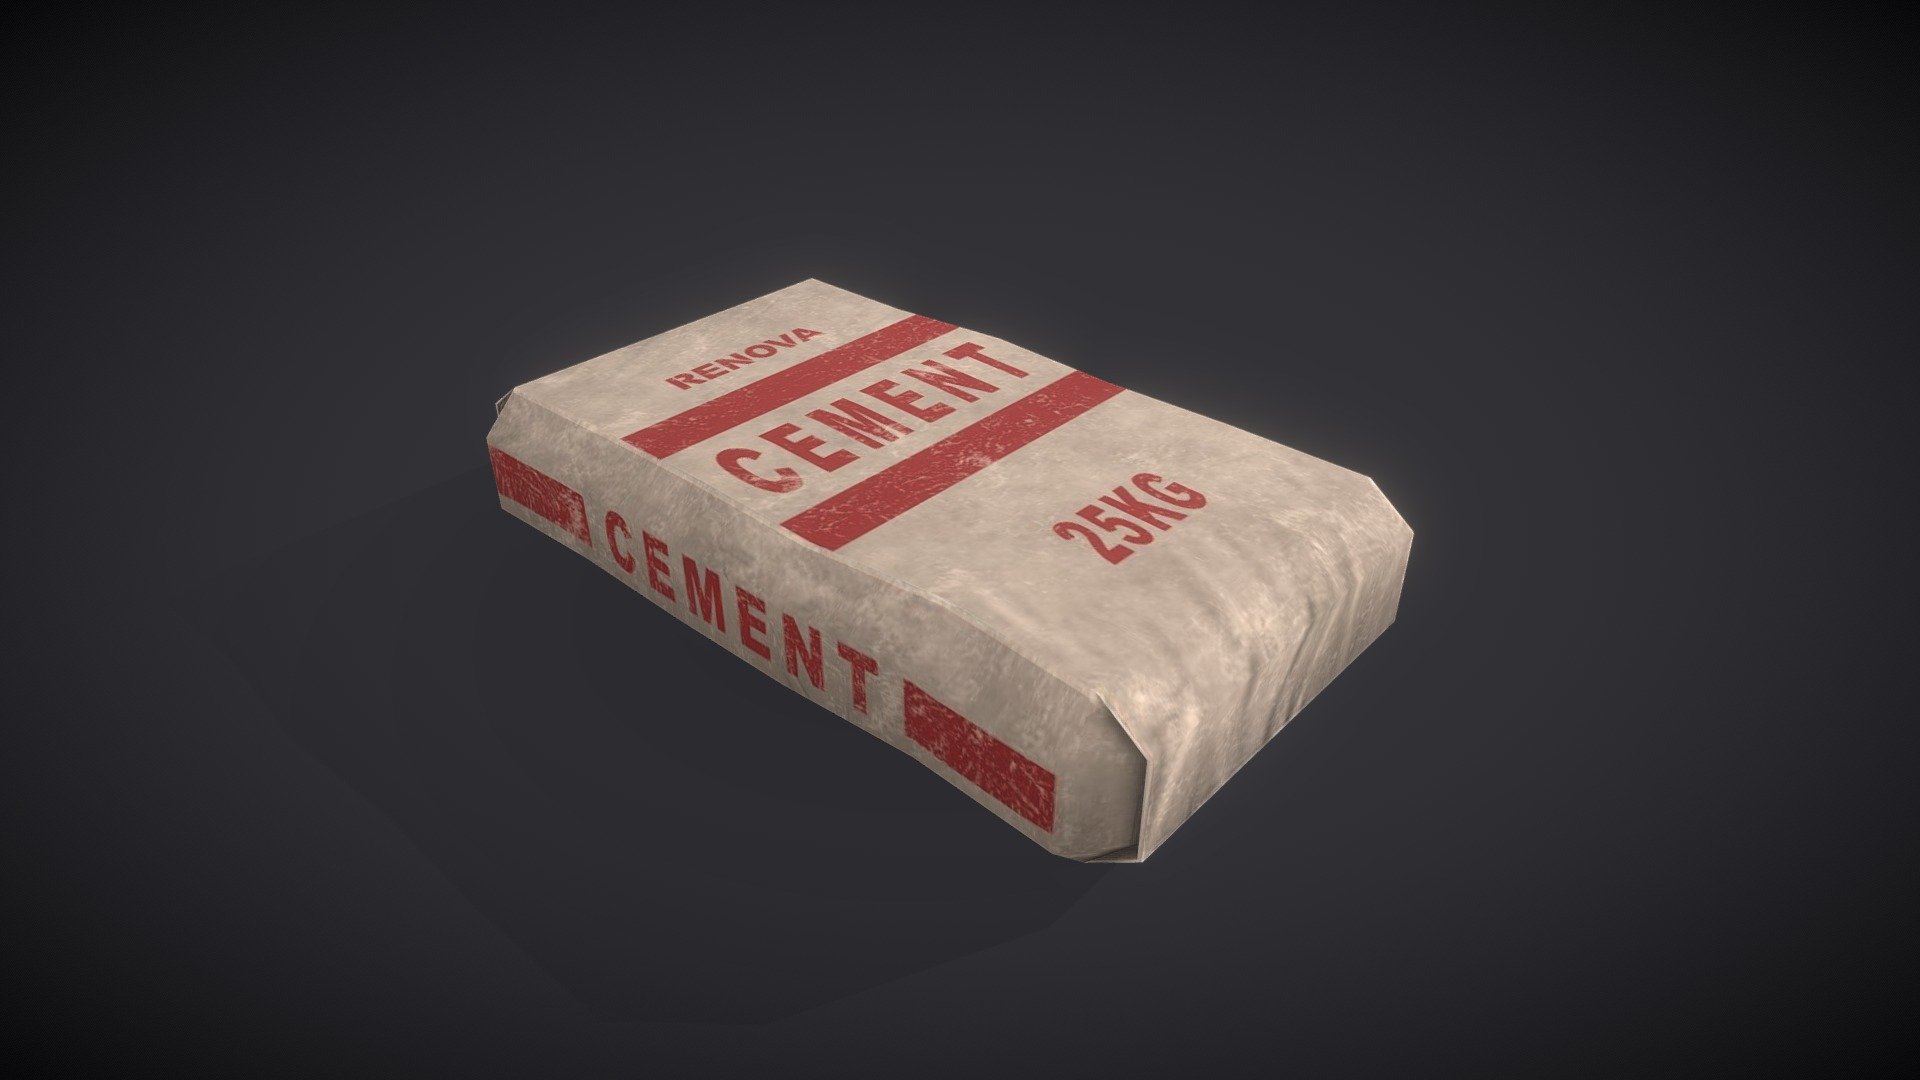 Cement



Dimensions : 0.83m x 0.171m x 0.494m

Texture : PBR, 1024

Files Include : Textures, GLB &amp; FBX

Usage : VR, Game ready

.............

OVA’s flagship software, StellarX, allows those with no programming or coding knowledge to place 3D goods and create immersive experiences through simple drag-and-drop actions. 

Storytelling, which involves a series of interactions, sequences, and triggers are easily created through OVA’s patent-pending visual scripting tool. 

.............

**Download StellarX on the Meta Quest Store: oculus.com/experiences/quest/8132958546745663
**

**Download StellarX on Steam: store.steampowered.com/app/1214640/StellarX
**

Have a bigger immersive project in mind? Get in touch with us! 



StellarX on LinkedIn: linkedin.com/showcase/stellarx-by-ova

Join the StellarX Discord server! 

........

StellarX© 2022 - Cement - Buy Royalty Free 3D model by StellarX 3d model